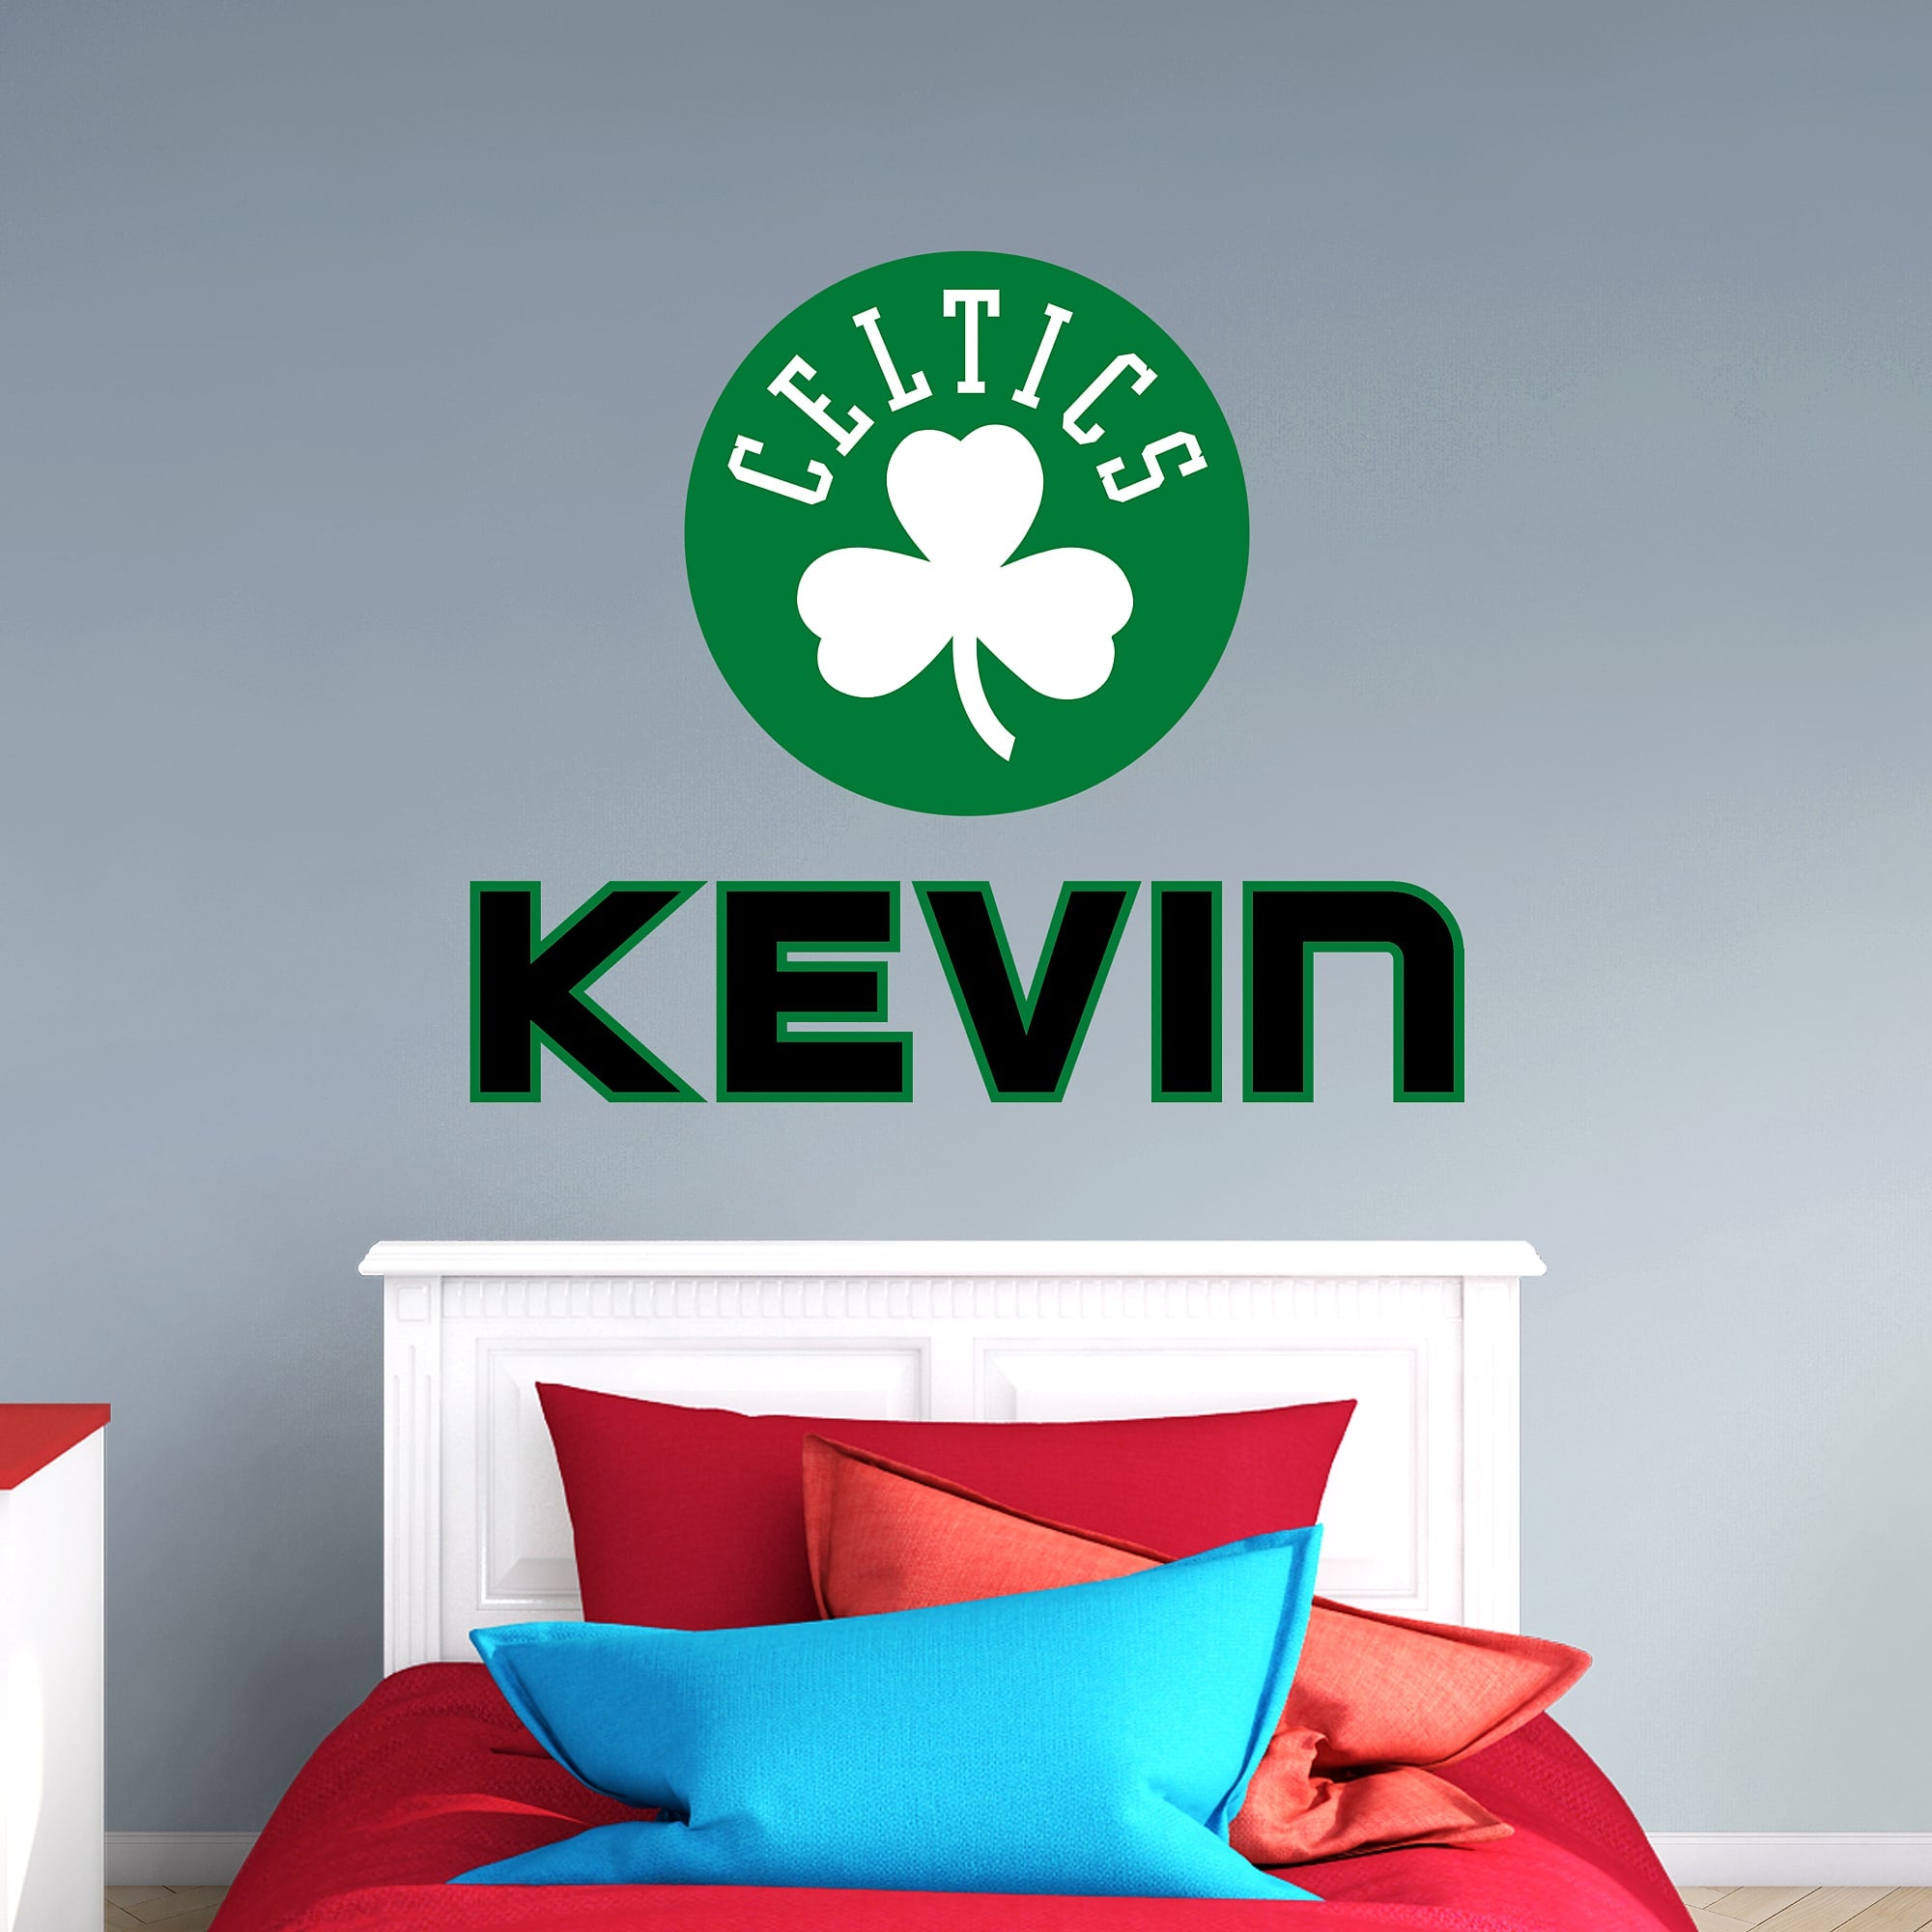 Boston Celtics: Shamrock Stacked Personalized Name - Officially Licensed NBA Transfer Decal in Black (52"W x 39.5"H) by Fathead